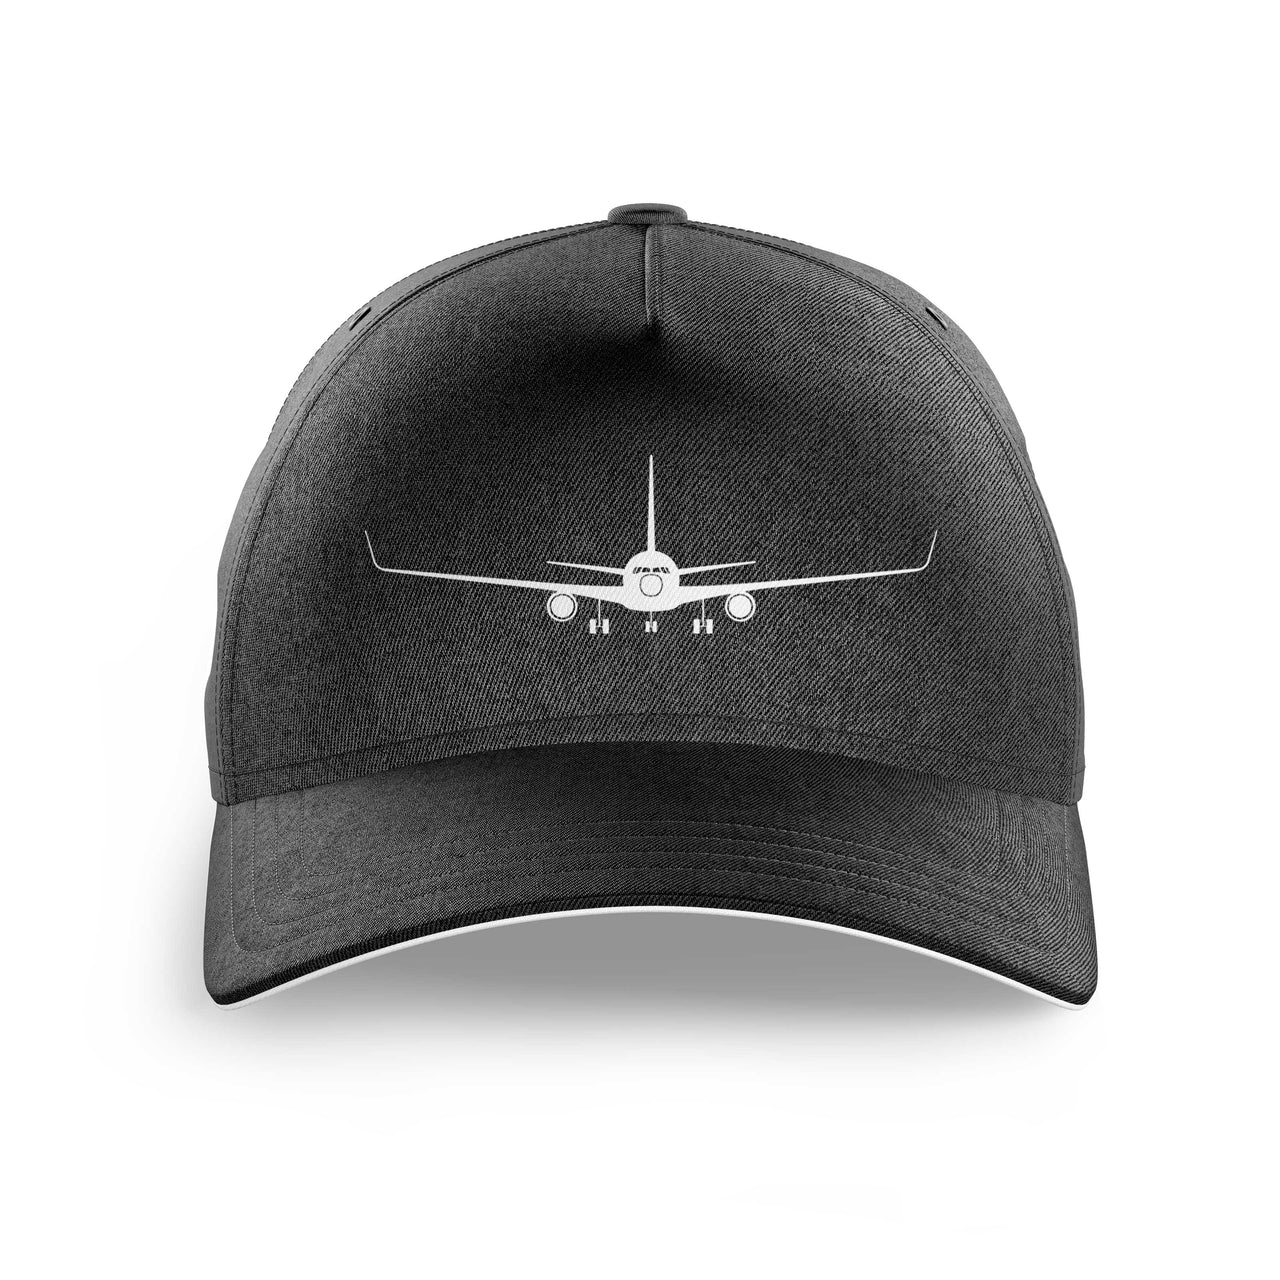 Boeing 767 Silhouette Printed Hats